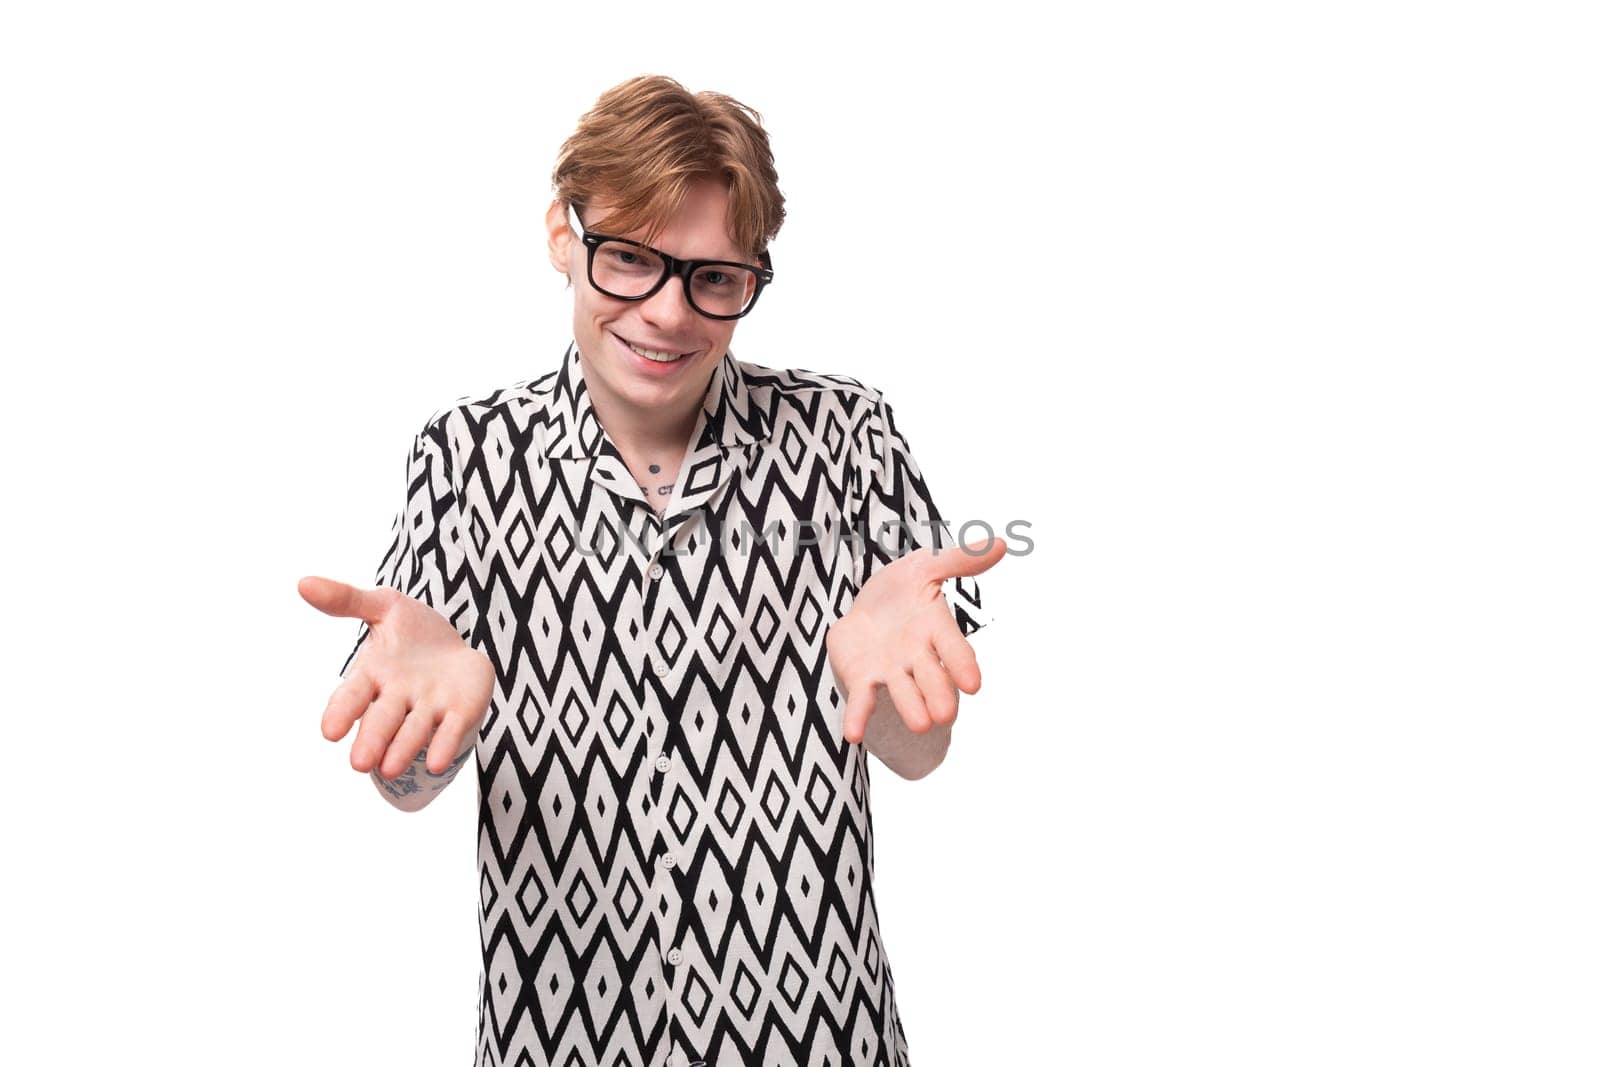 young laughing caucasian ginger man with a tattoo on his arms is dressed in a black and white short sleeve shirt.